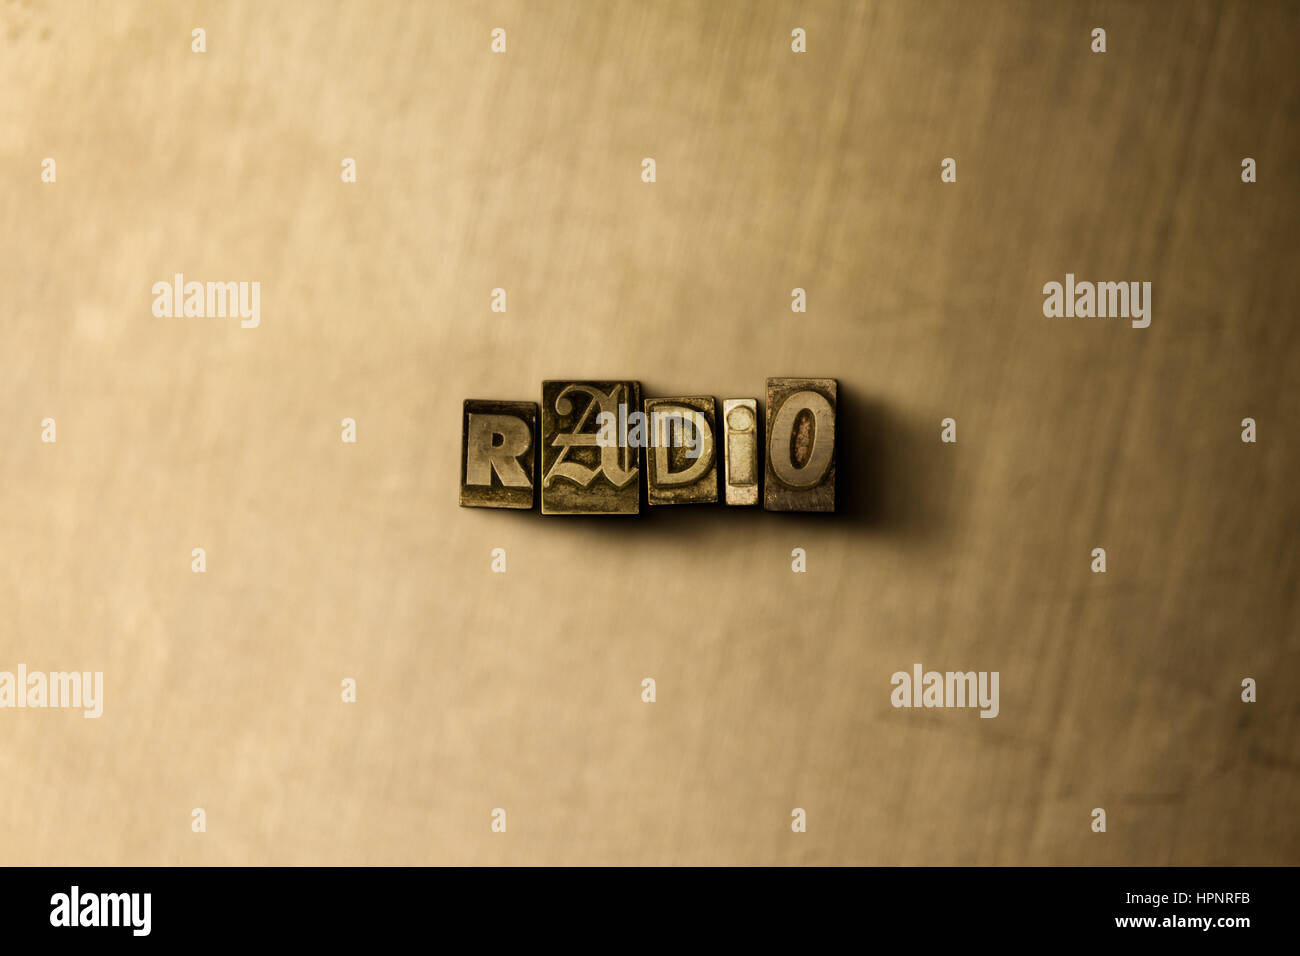 RADIO - close-up of grungy vintage typeset word on metal backdrop. Royalty  free stock illustration. Can be used for online banner ads and direct mail  Stock Photo - Alamy